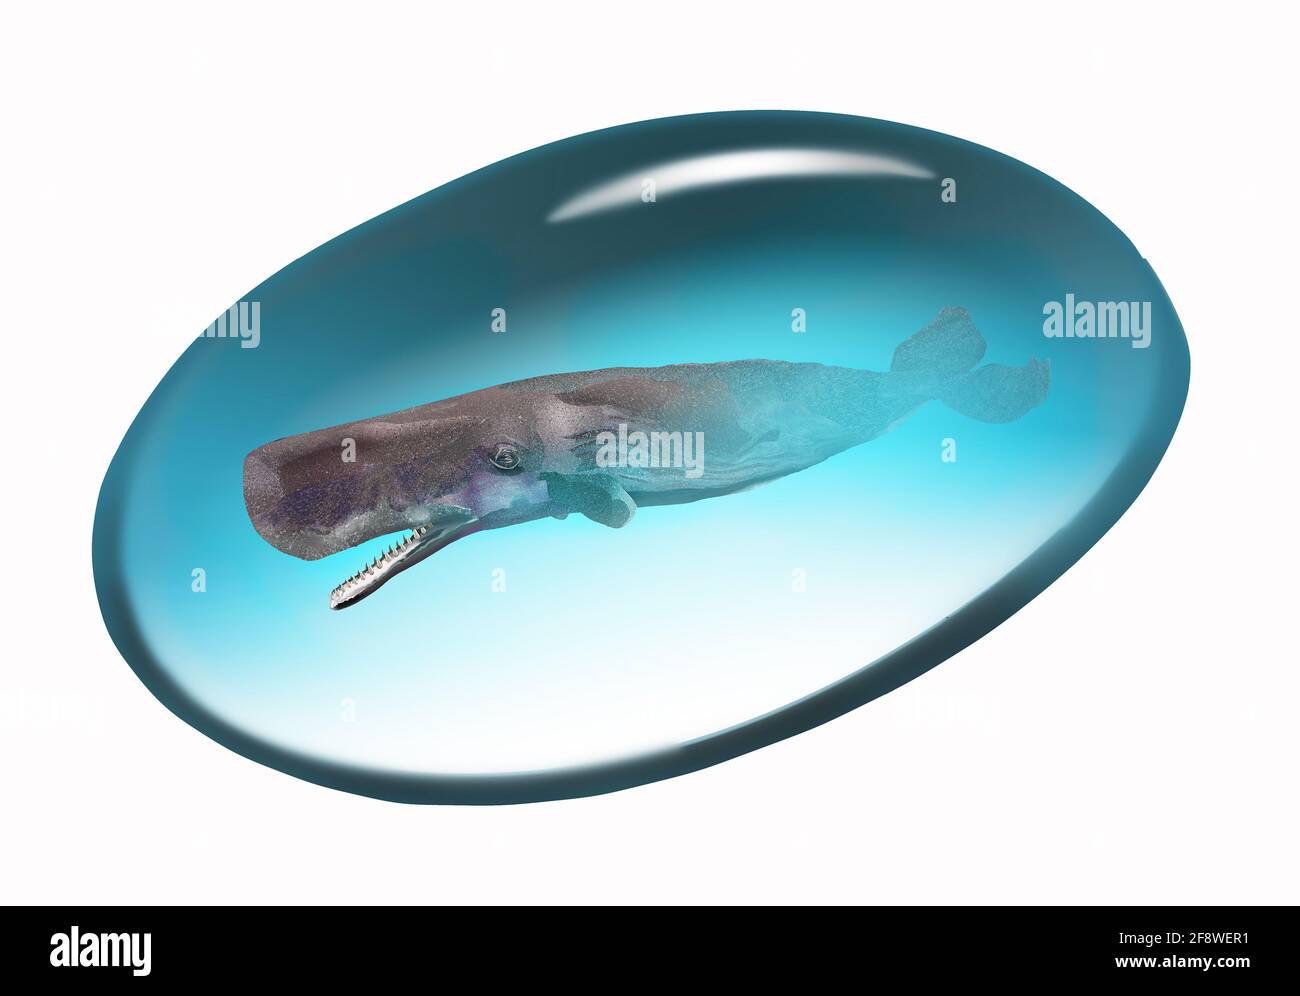 A sperm whale is seen inside a drop of water in a 3-D illustration about water quality and ocean ecology. Stock Photo